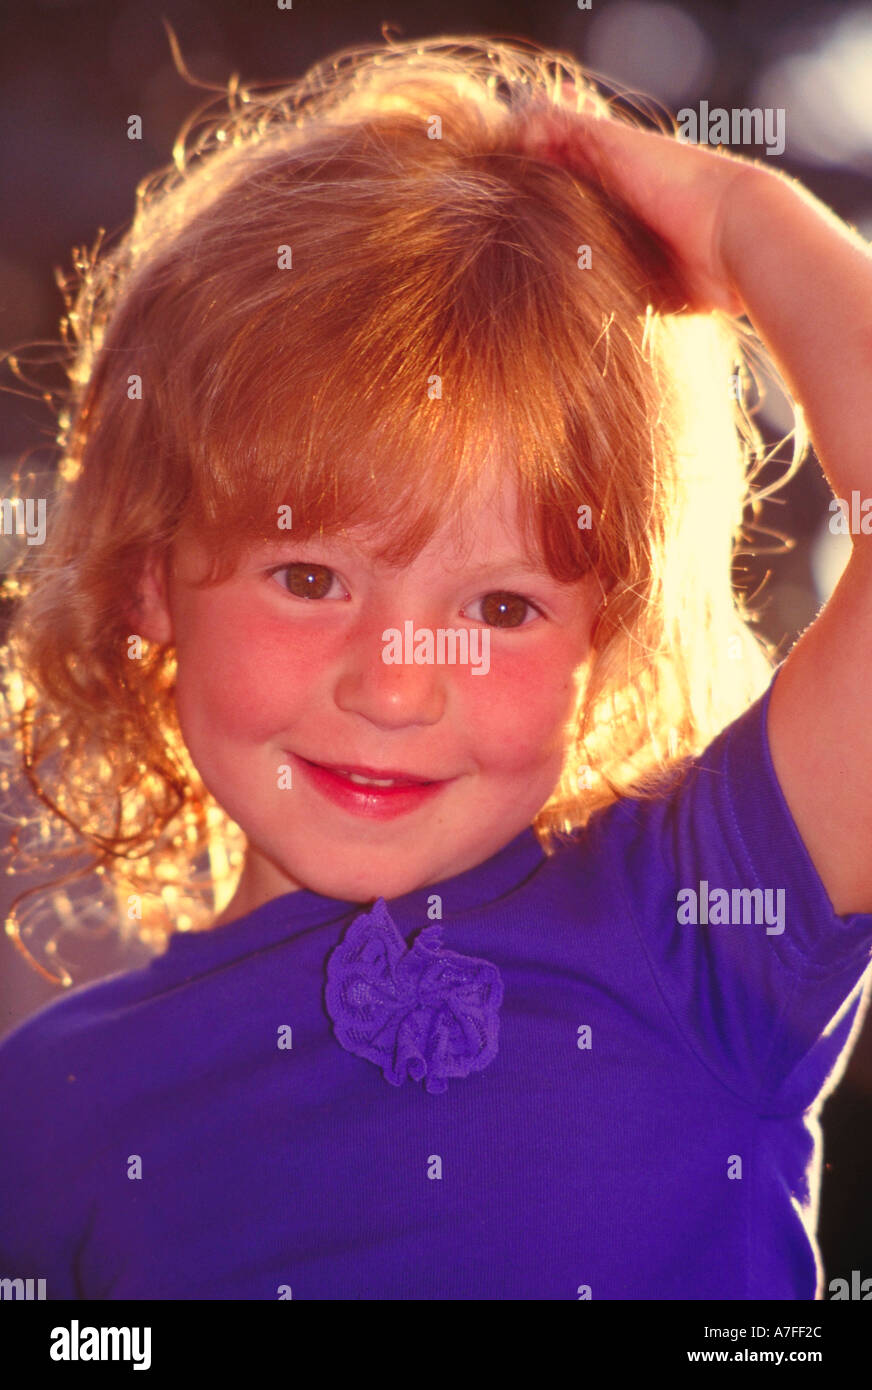 Portrait of young red haired girl with rosy cheeks Stock Photo